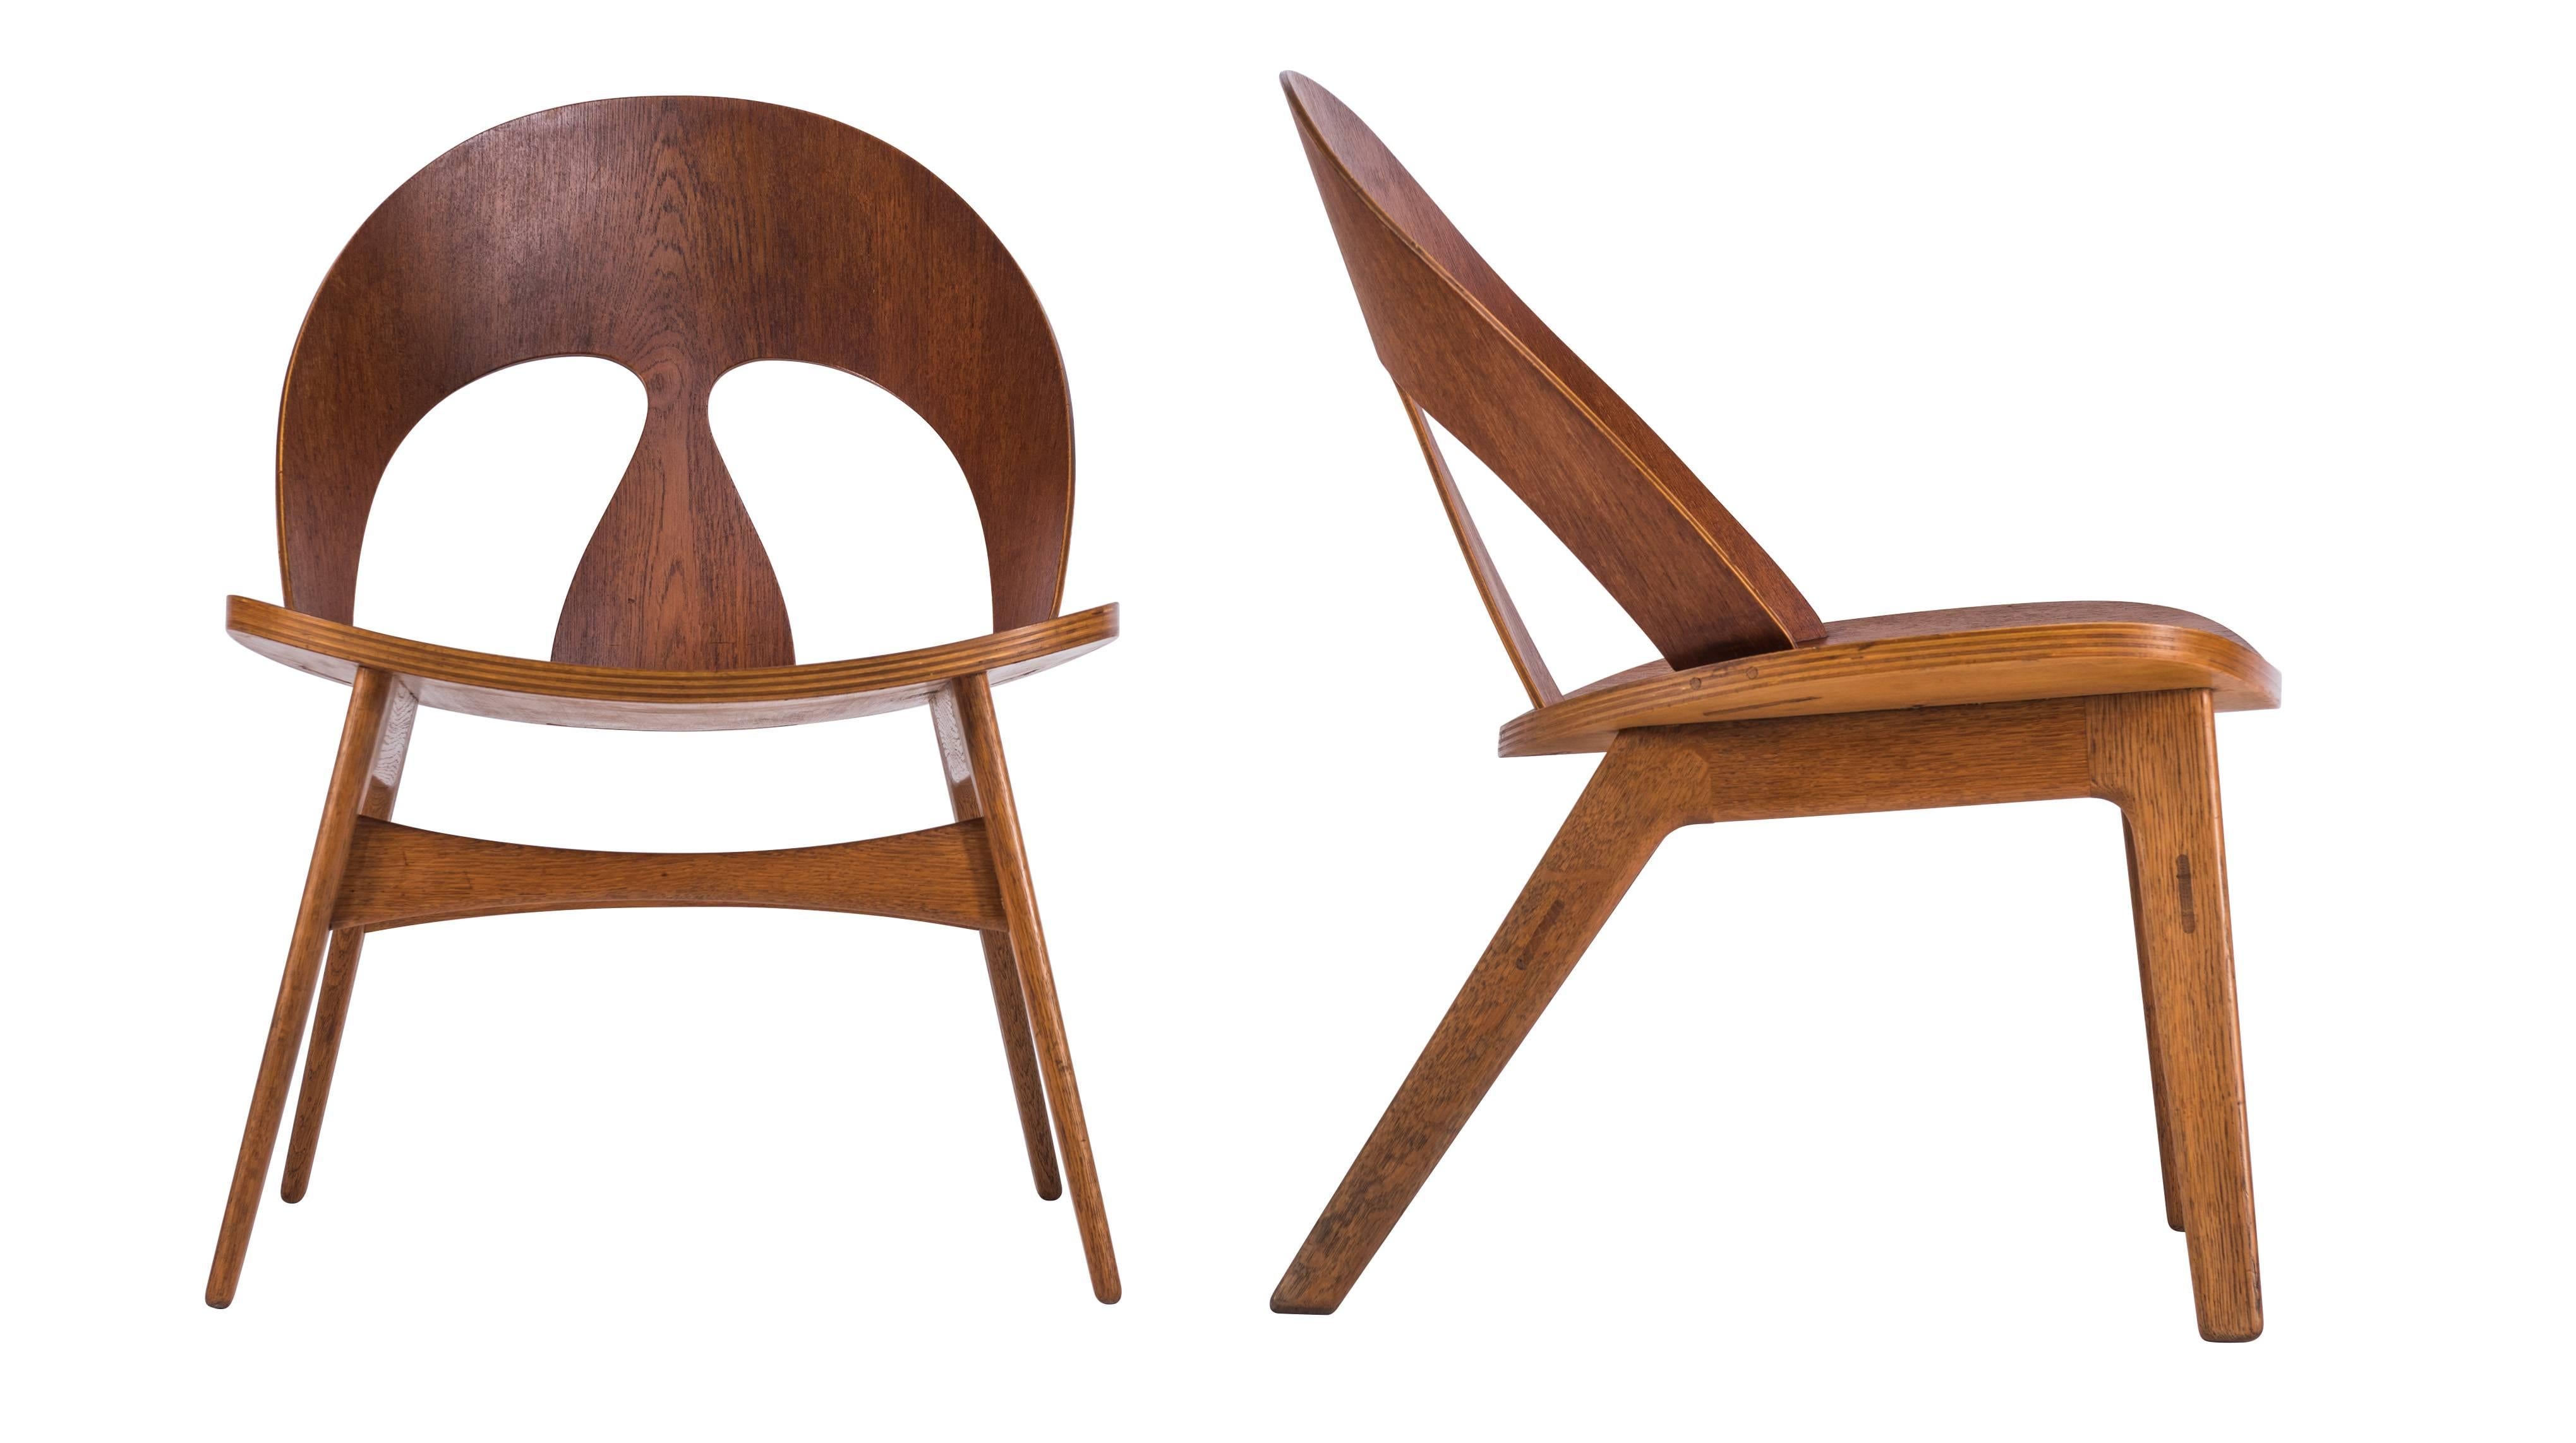 Rare and very early Mogensen plywood lounge chairs. Chairs with teak plywood seats and backs and oak legs. Signed with early Erhard Rasmussen labels.